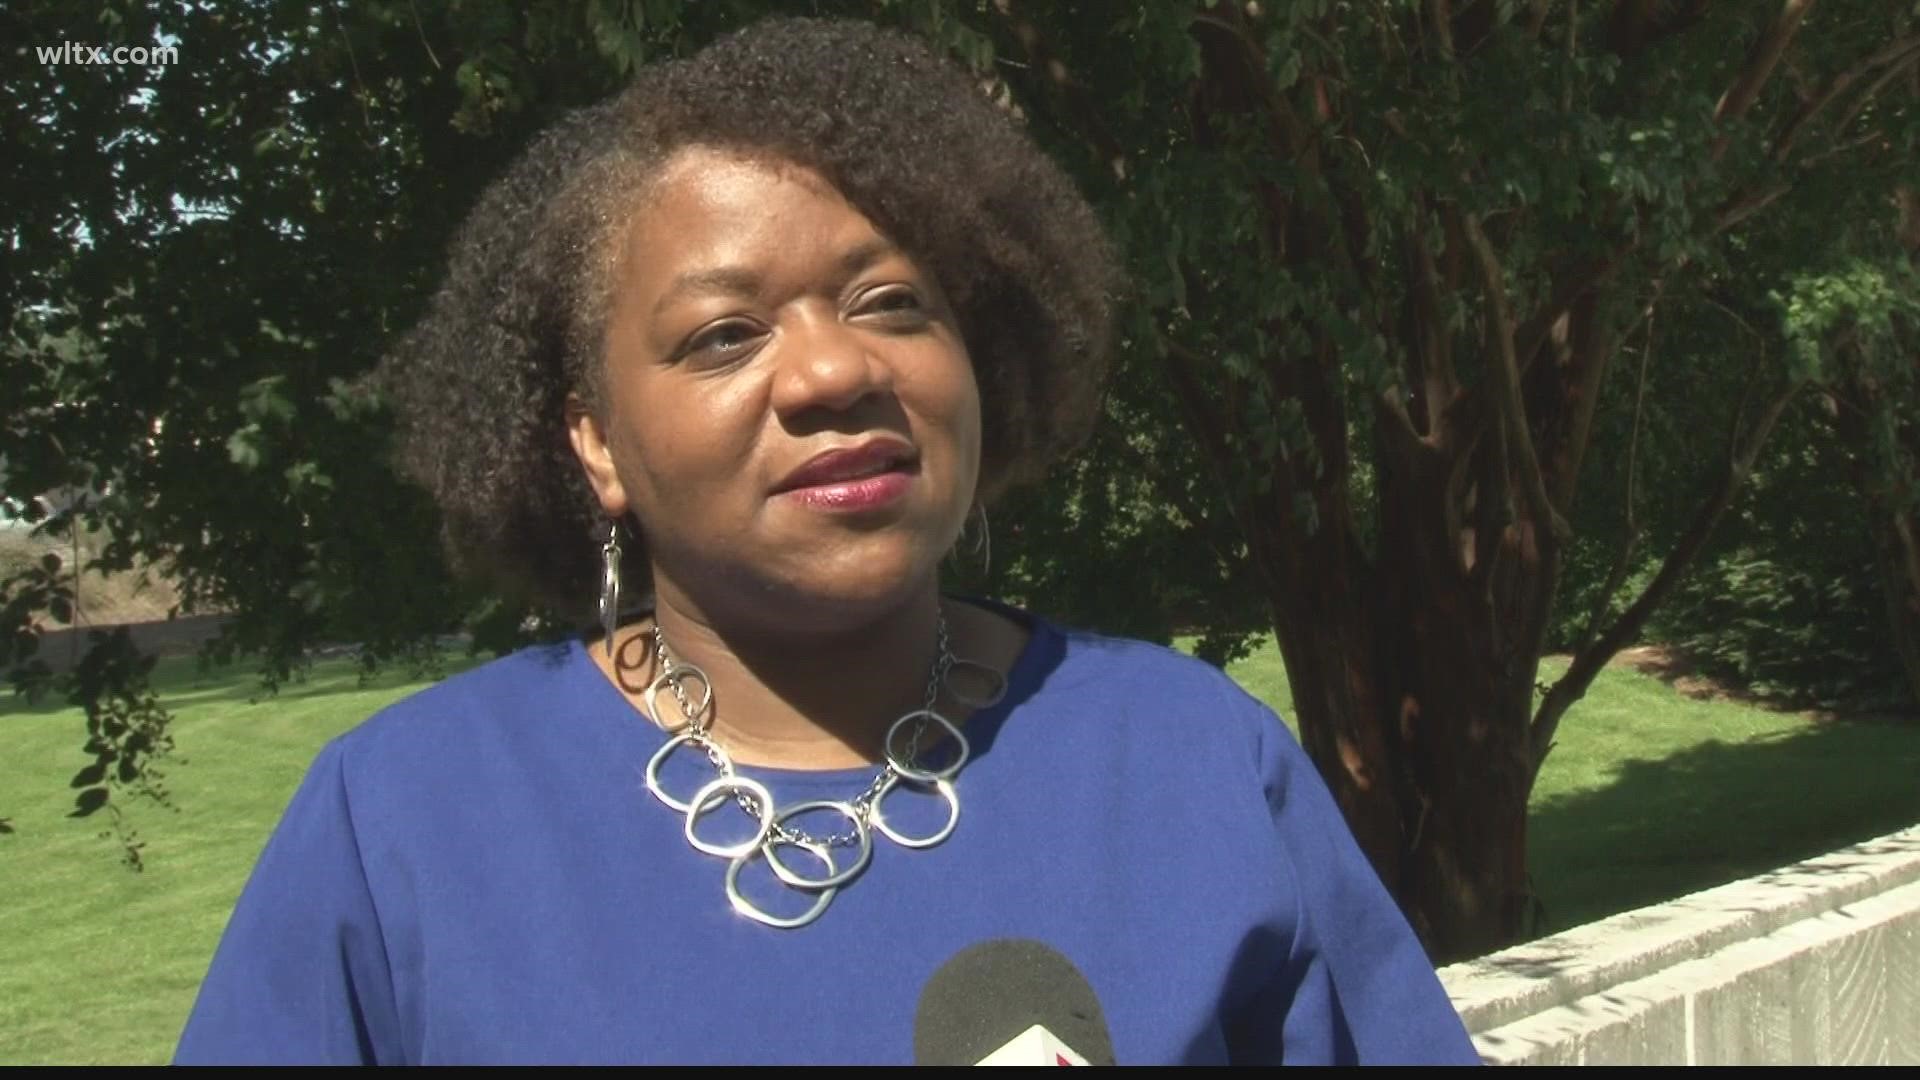 News 19 recently sat down with Columbia mayoral candidates and asked them the same 5 questions. Here's what Tameika Isaac Devine had to say.